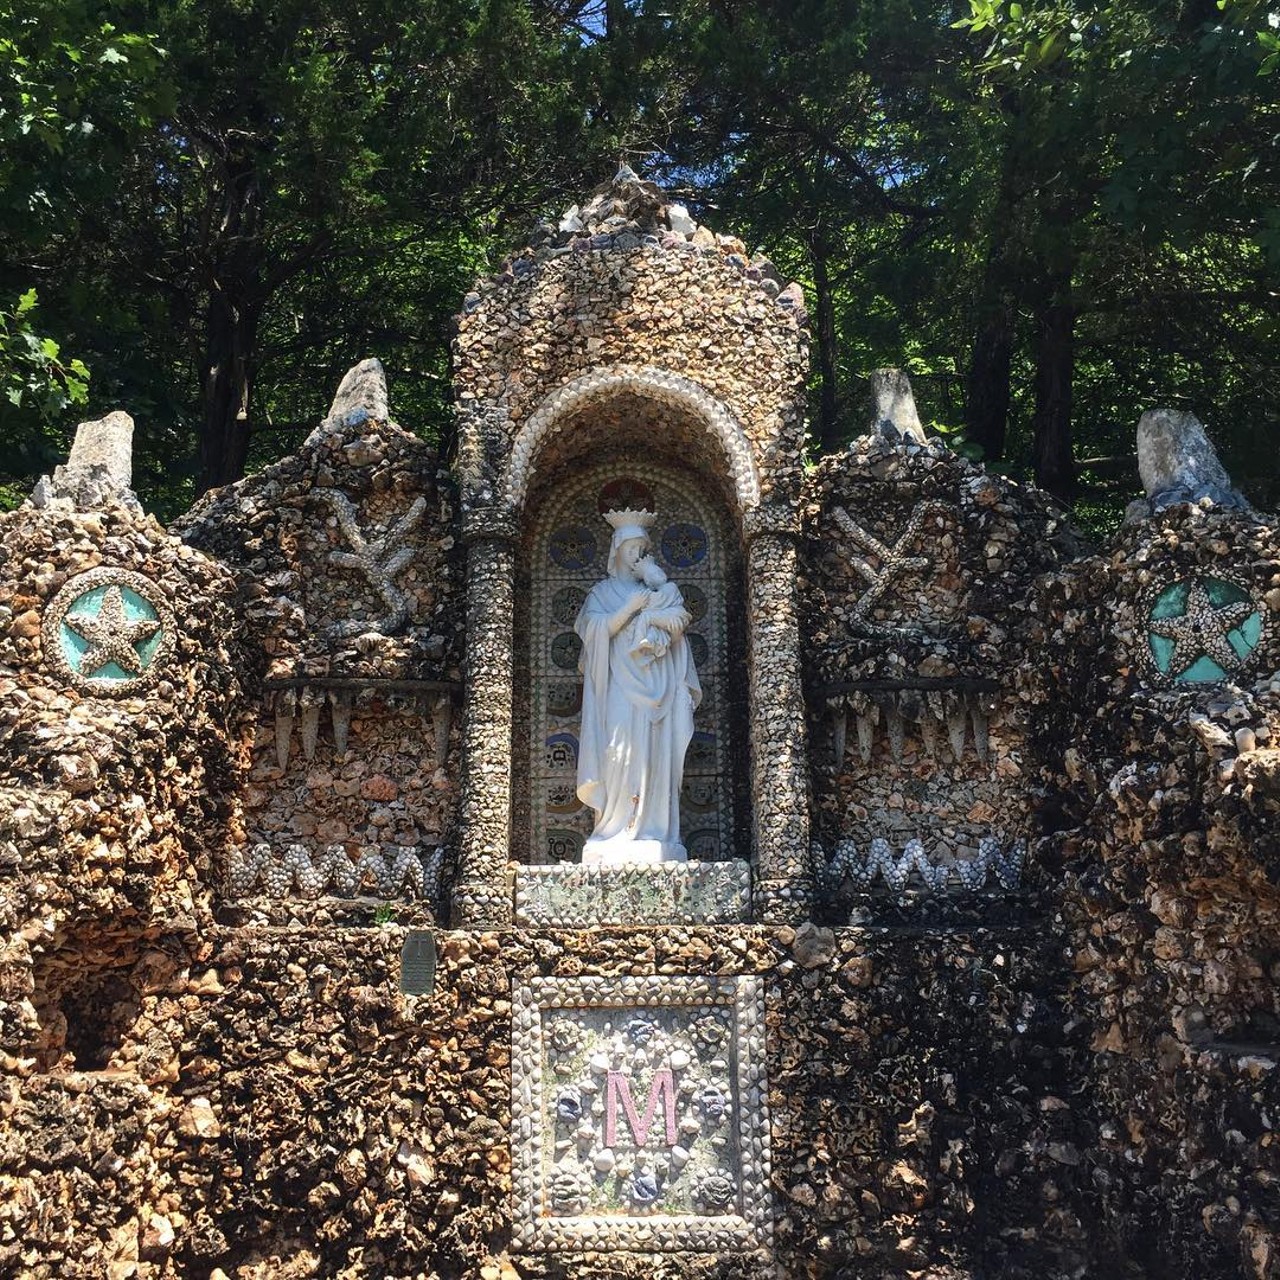 Black Madonna Shrine and Grottoes
100 St Joseph Hill Rd., Pacific, MO
Built by Brother Bronislaus, a Franciscan friar and native of Poland, this special spot is a replica of the Black Madonna of Cz?stochowa site in his Bronislaus' country of birth
Photo courtesy of midnight_river / Instagram